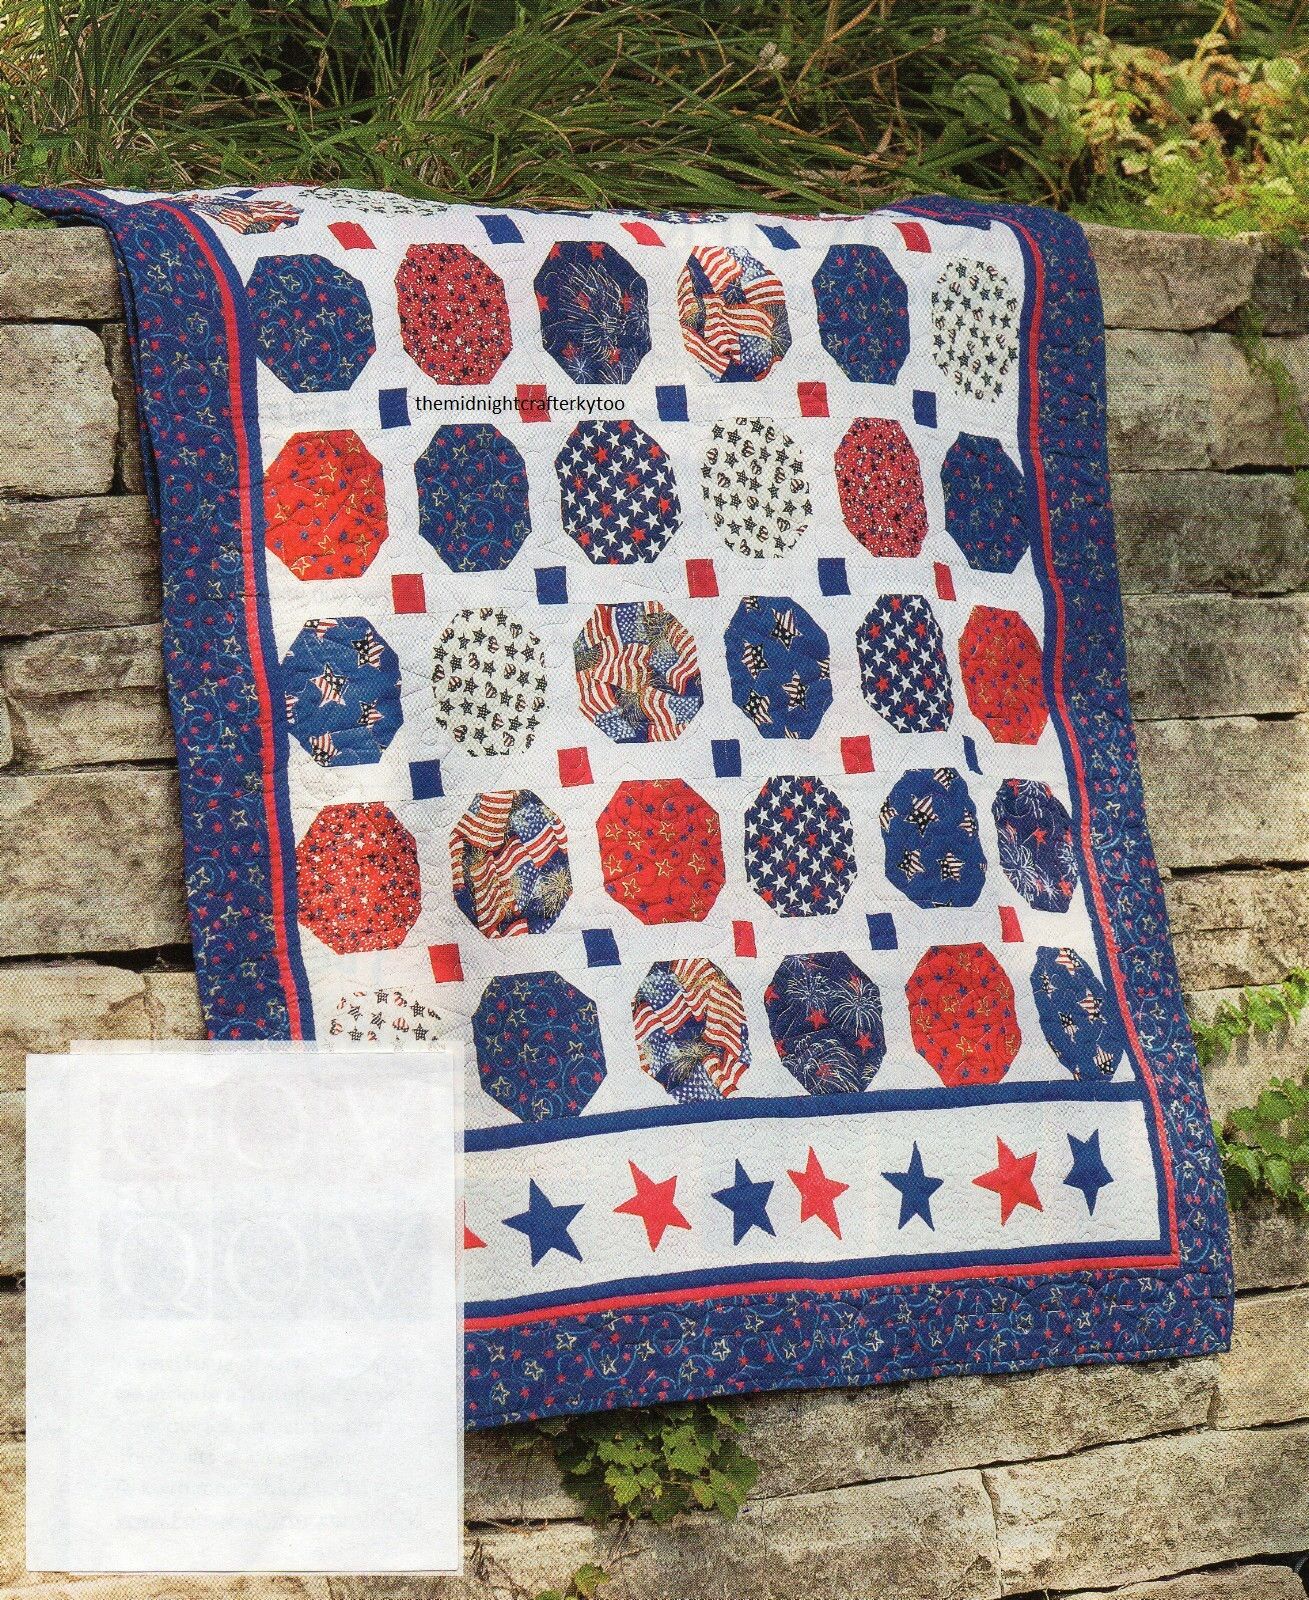 New popularity America The Max 66% OFF Beautiful Quilt FM Pattern Pieced Applique